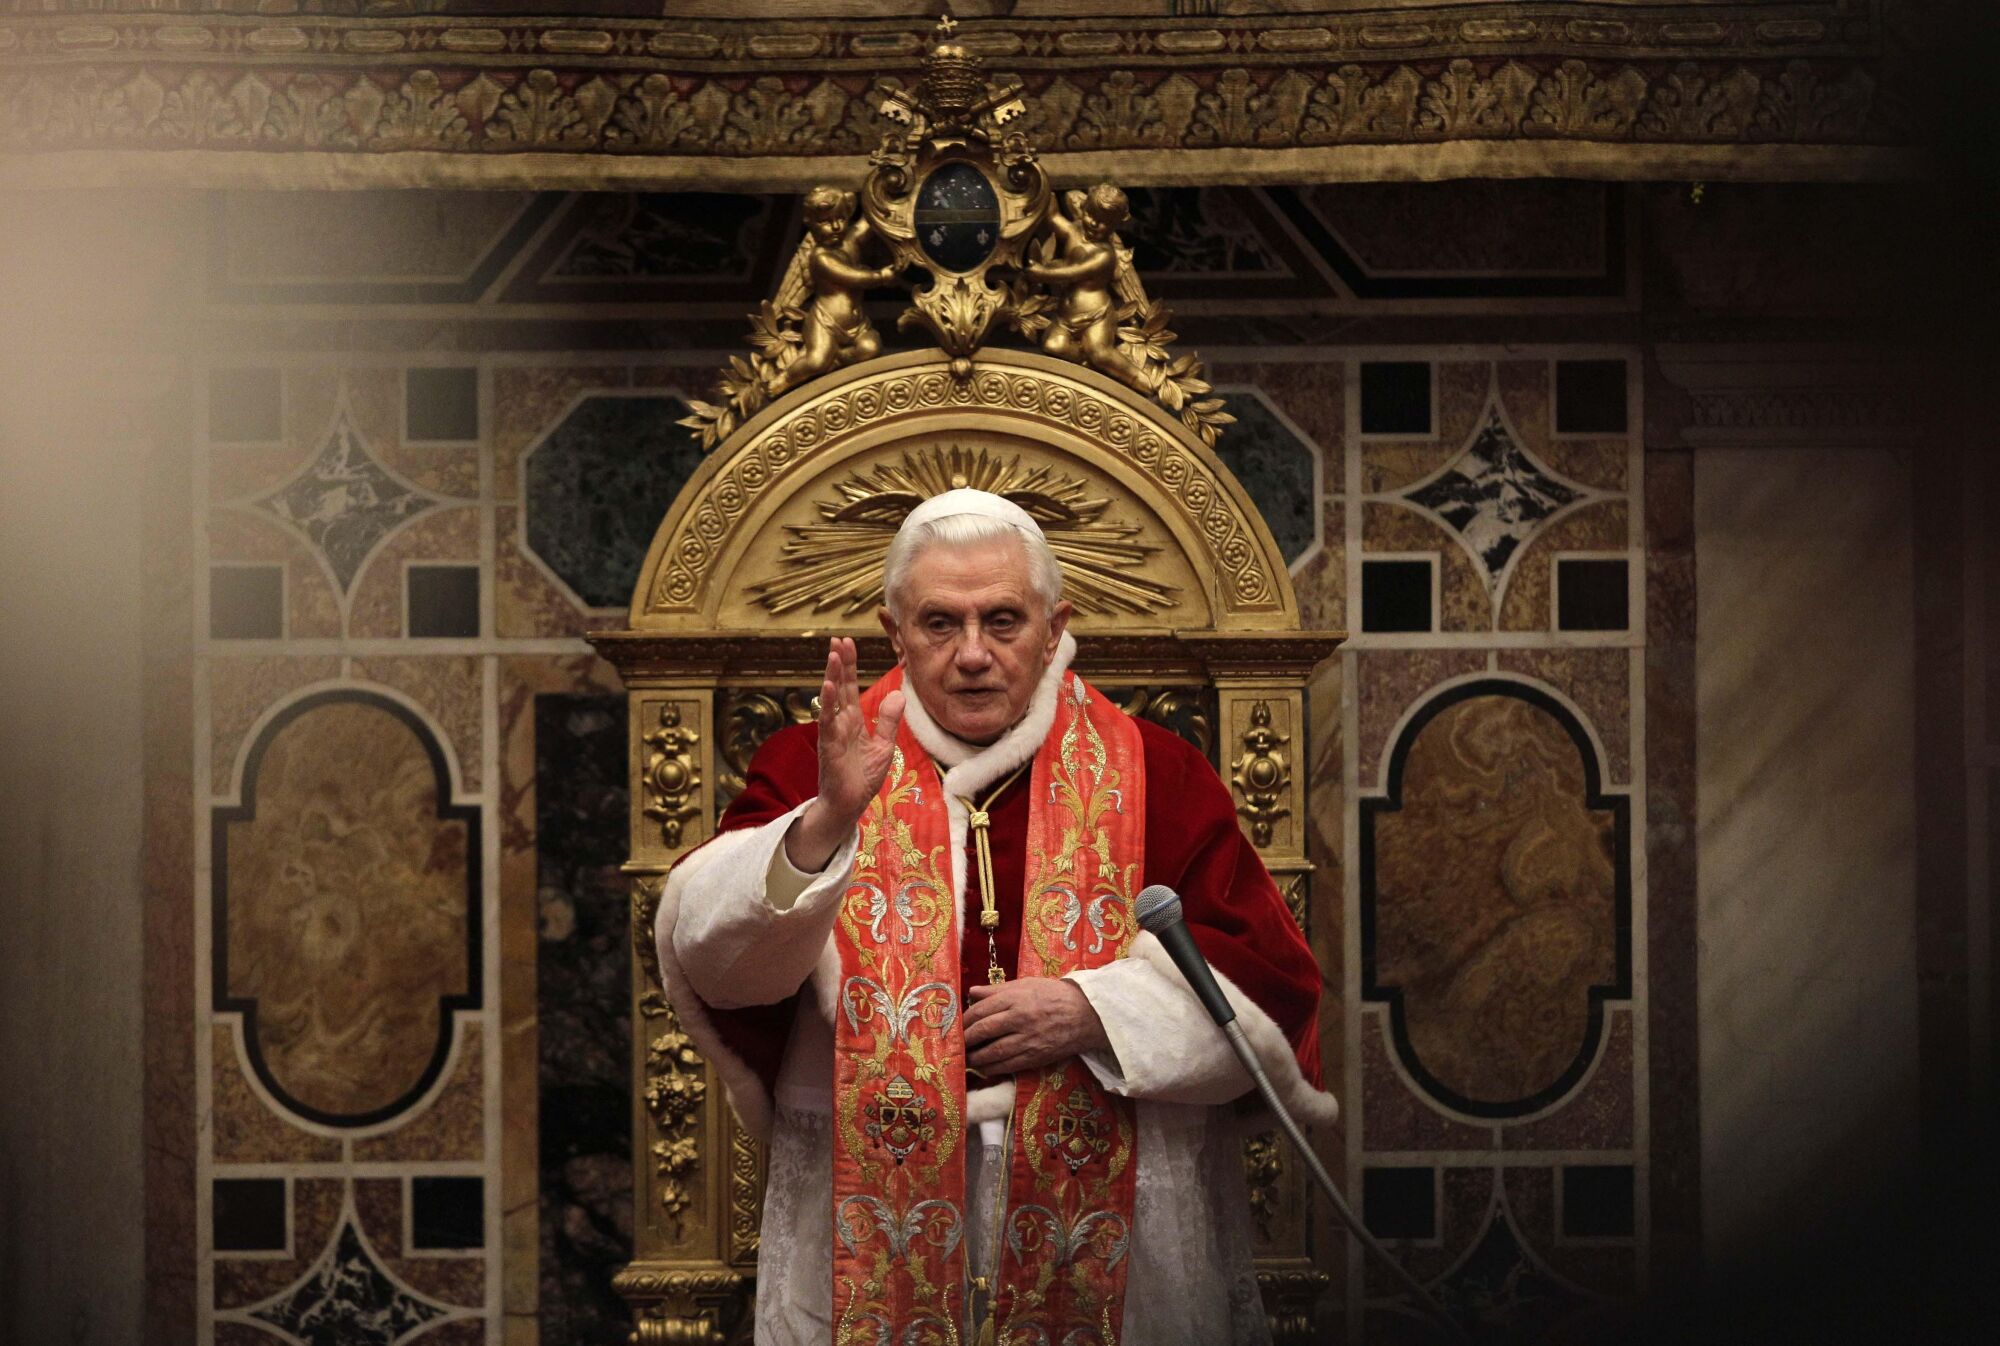 Pope Benedict XVI delivers his blessing while wearing red and white vestments.